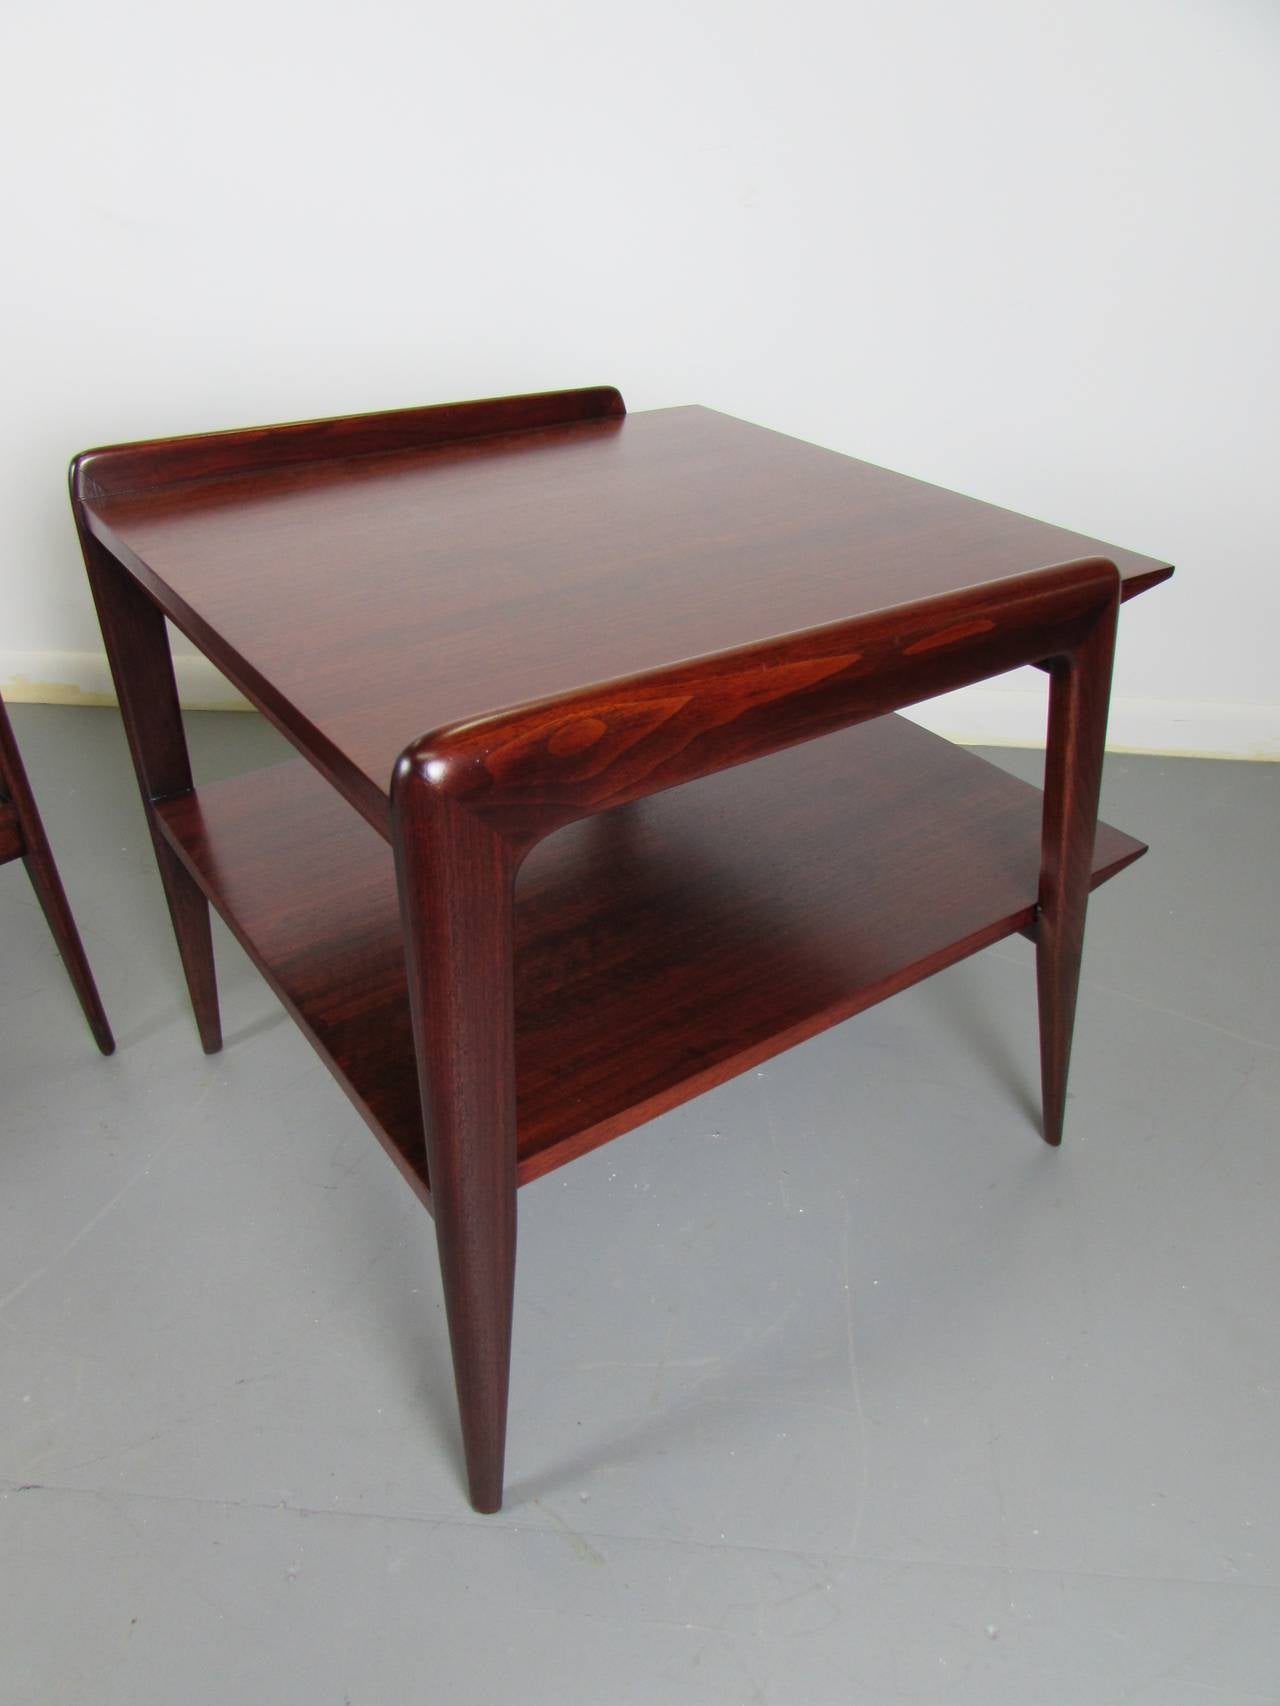 Mid-Century Modern Rare and Wicked Pair of End Tables by M. Singer & Sons, Attributed to Gio Ponti